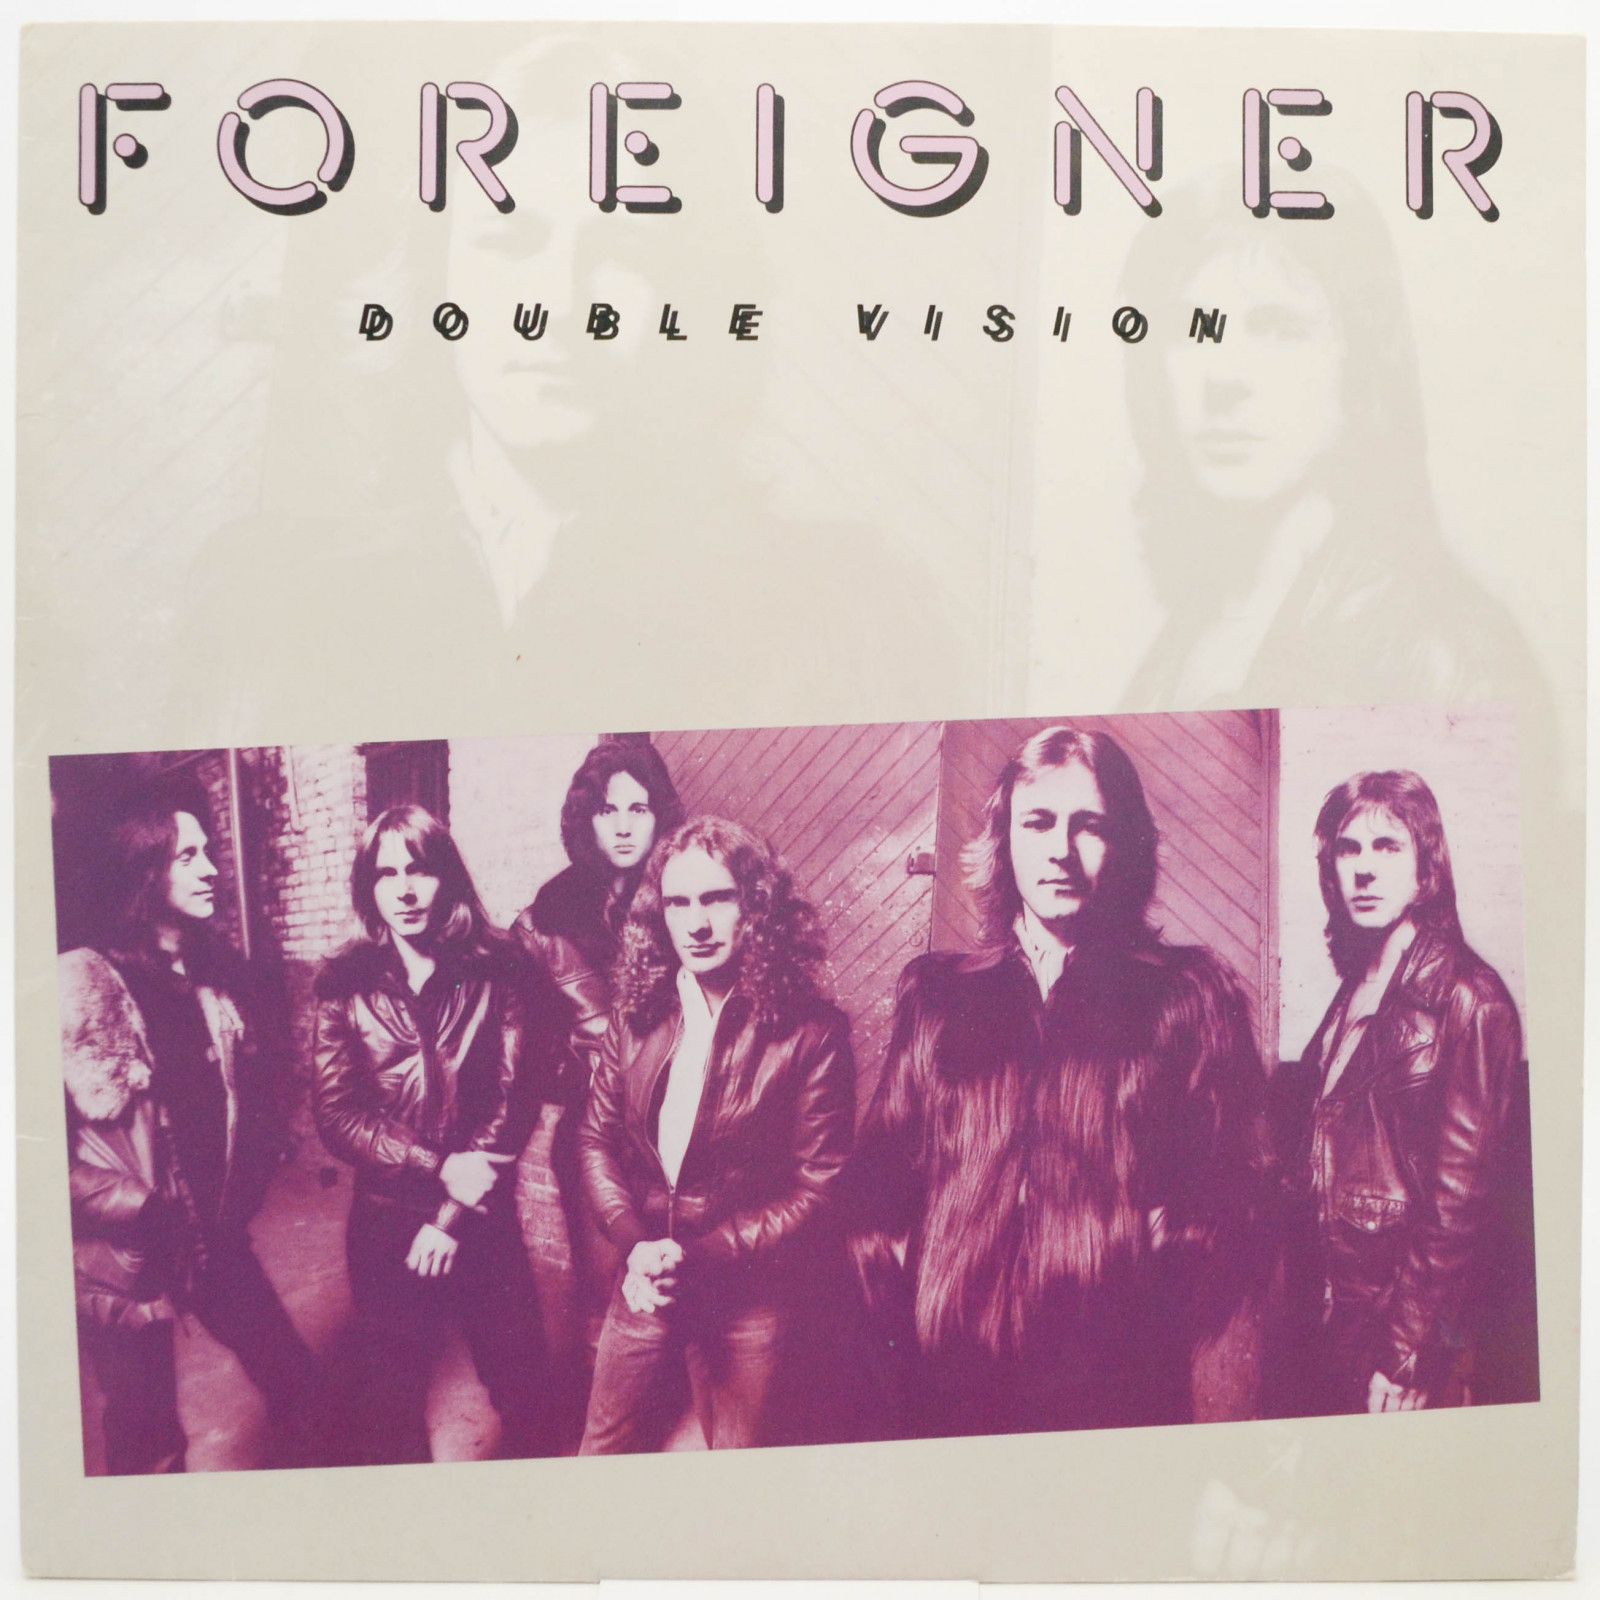 Foreigner — Double Vision, 1978